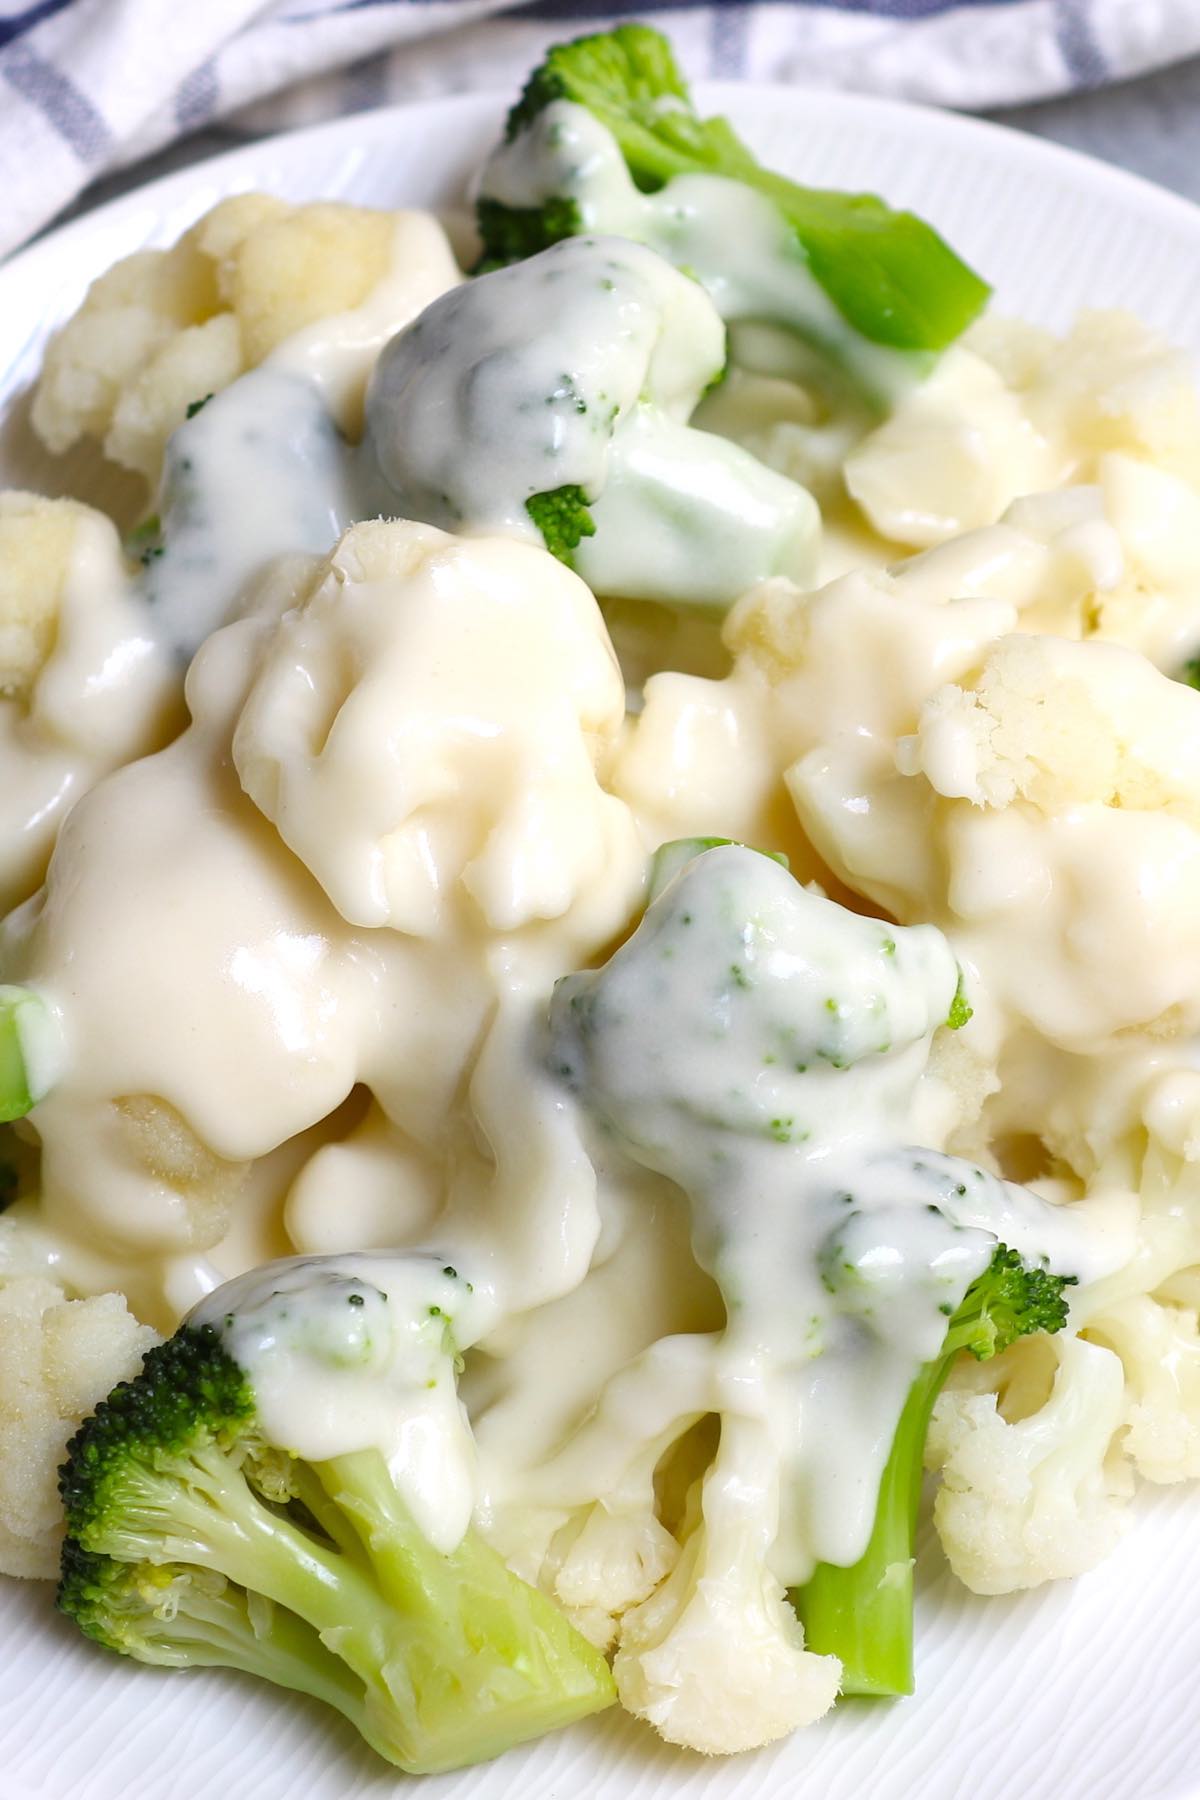 Steamed broccoli and cauliflower florets covered in cheddar sauce